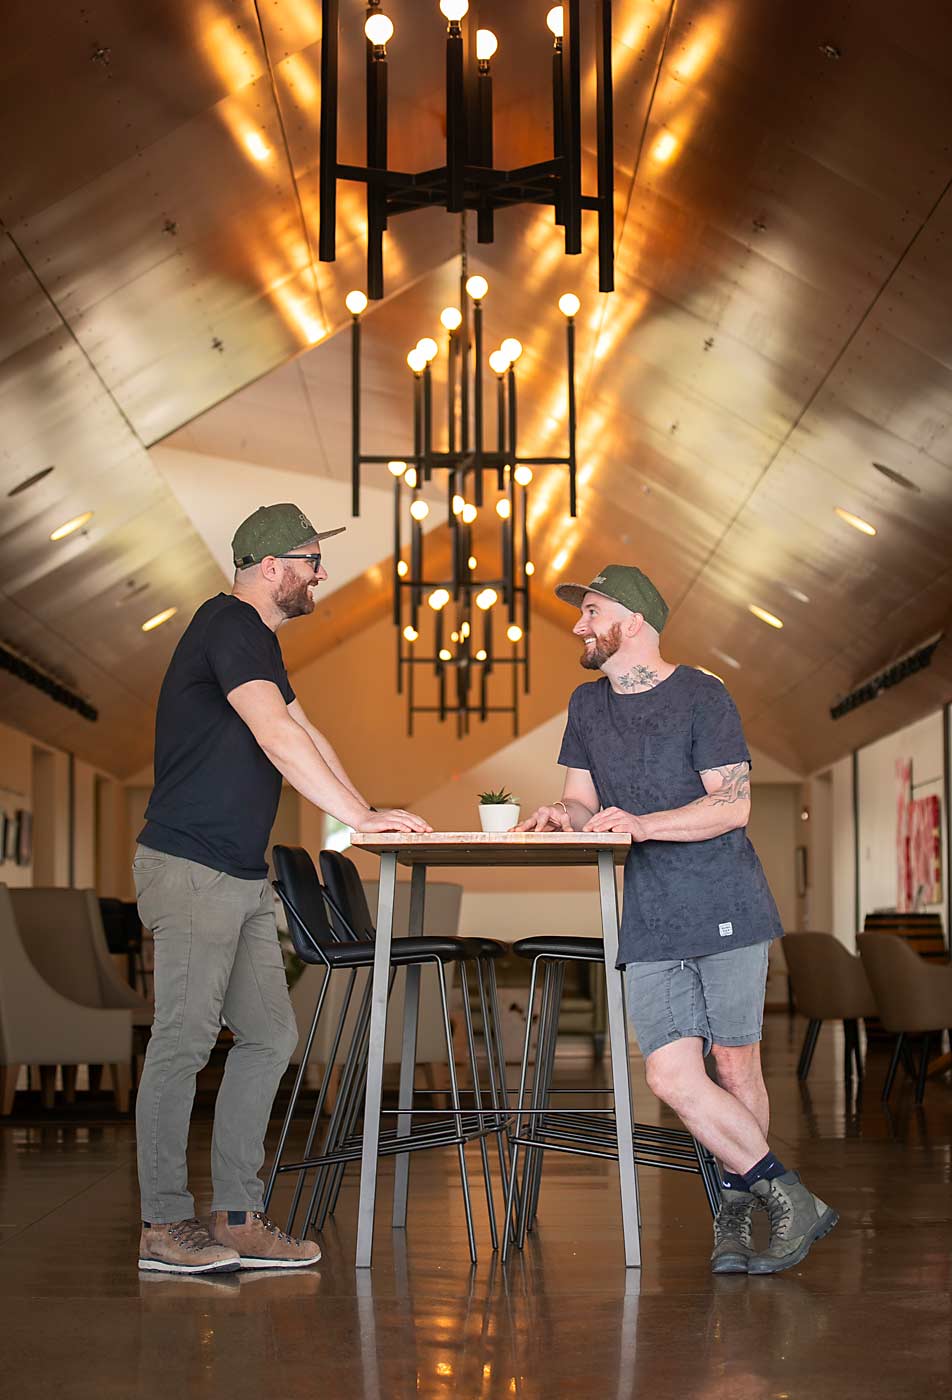 Today’s tasting room is a far cry from their grandparents’ basement, even though it’s still right next door. JJ and Tyler said they never felt pressured into the business, but “we both went away to school knowing we wanted to come back,” JJ said. (TJ Mullinax/Good Fruit Grower)